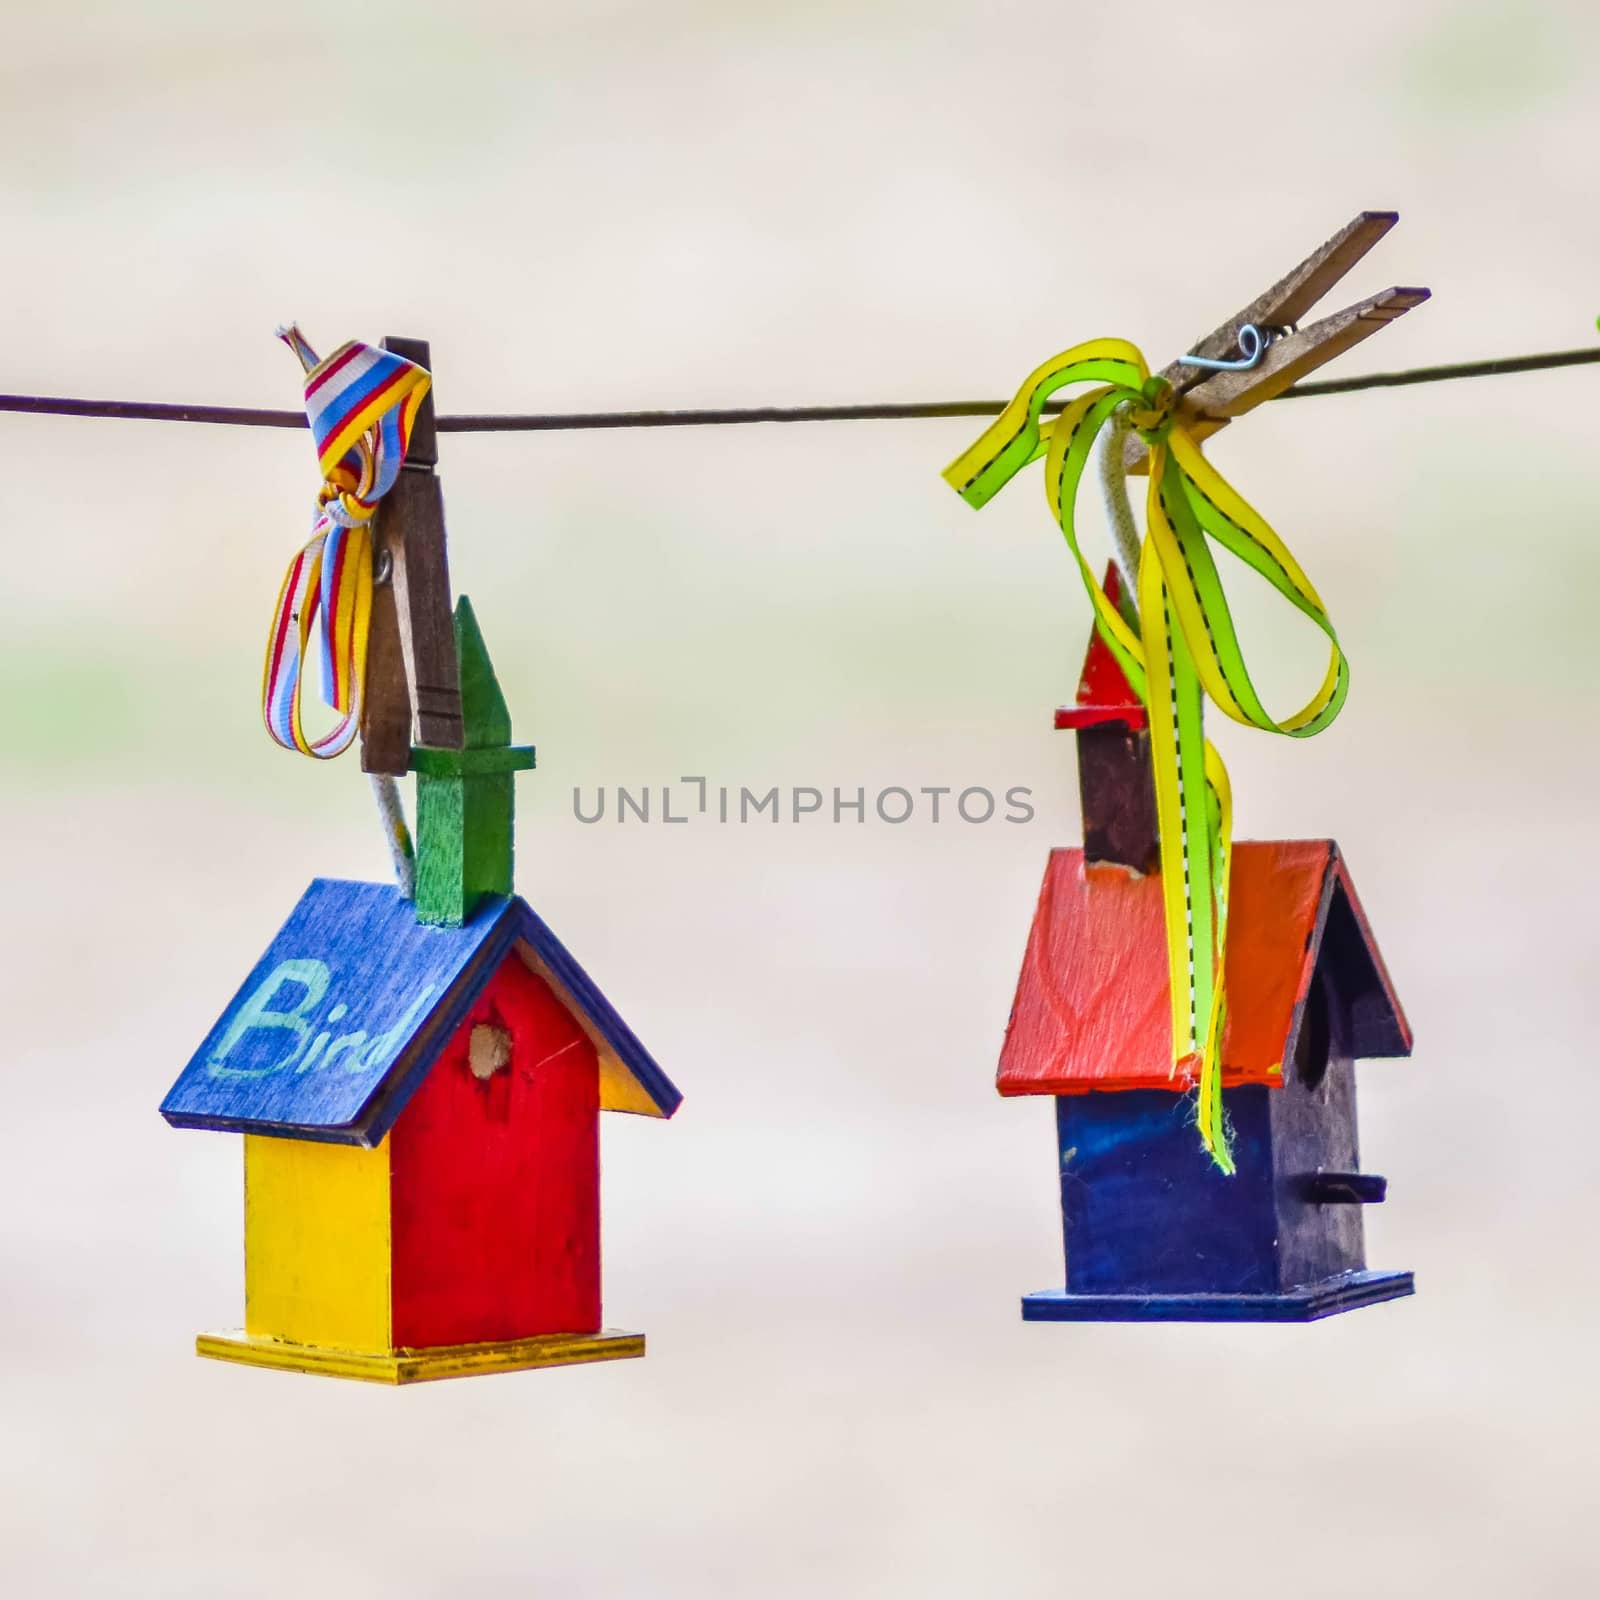 little colorful bird houses on clothes line